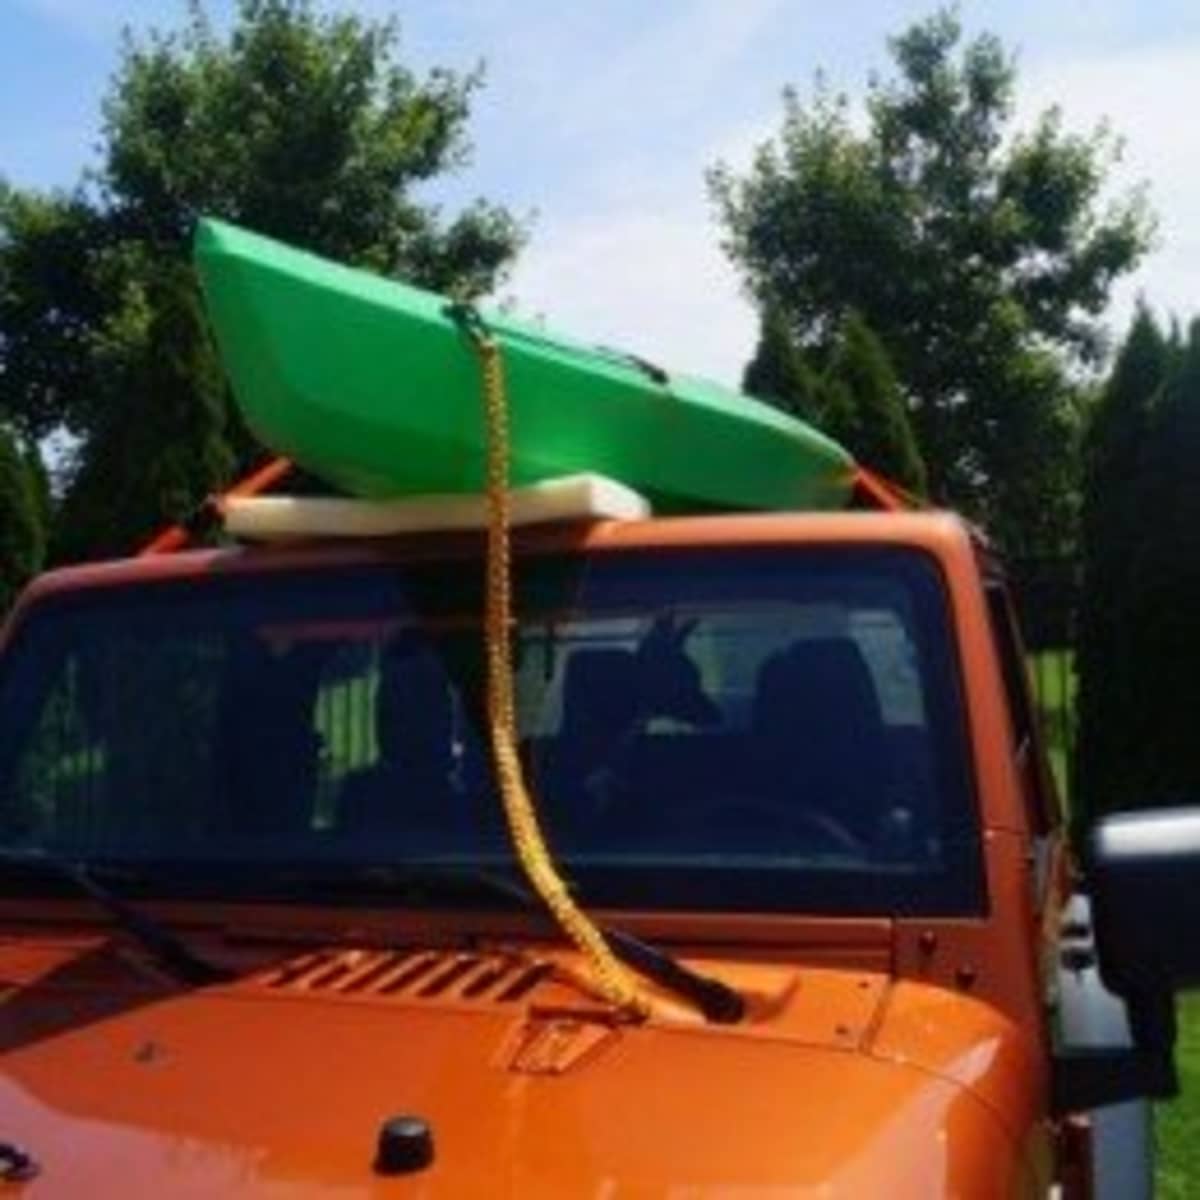 How to Strap a Kayak to a Soft Top Jeep for Transport - SkyAboveUs